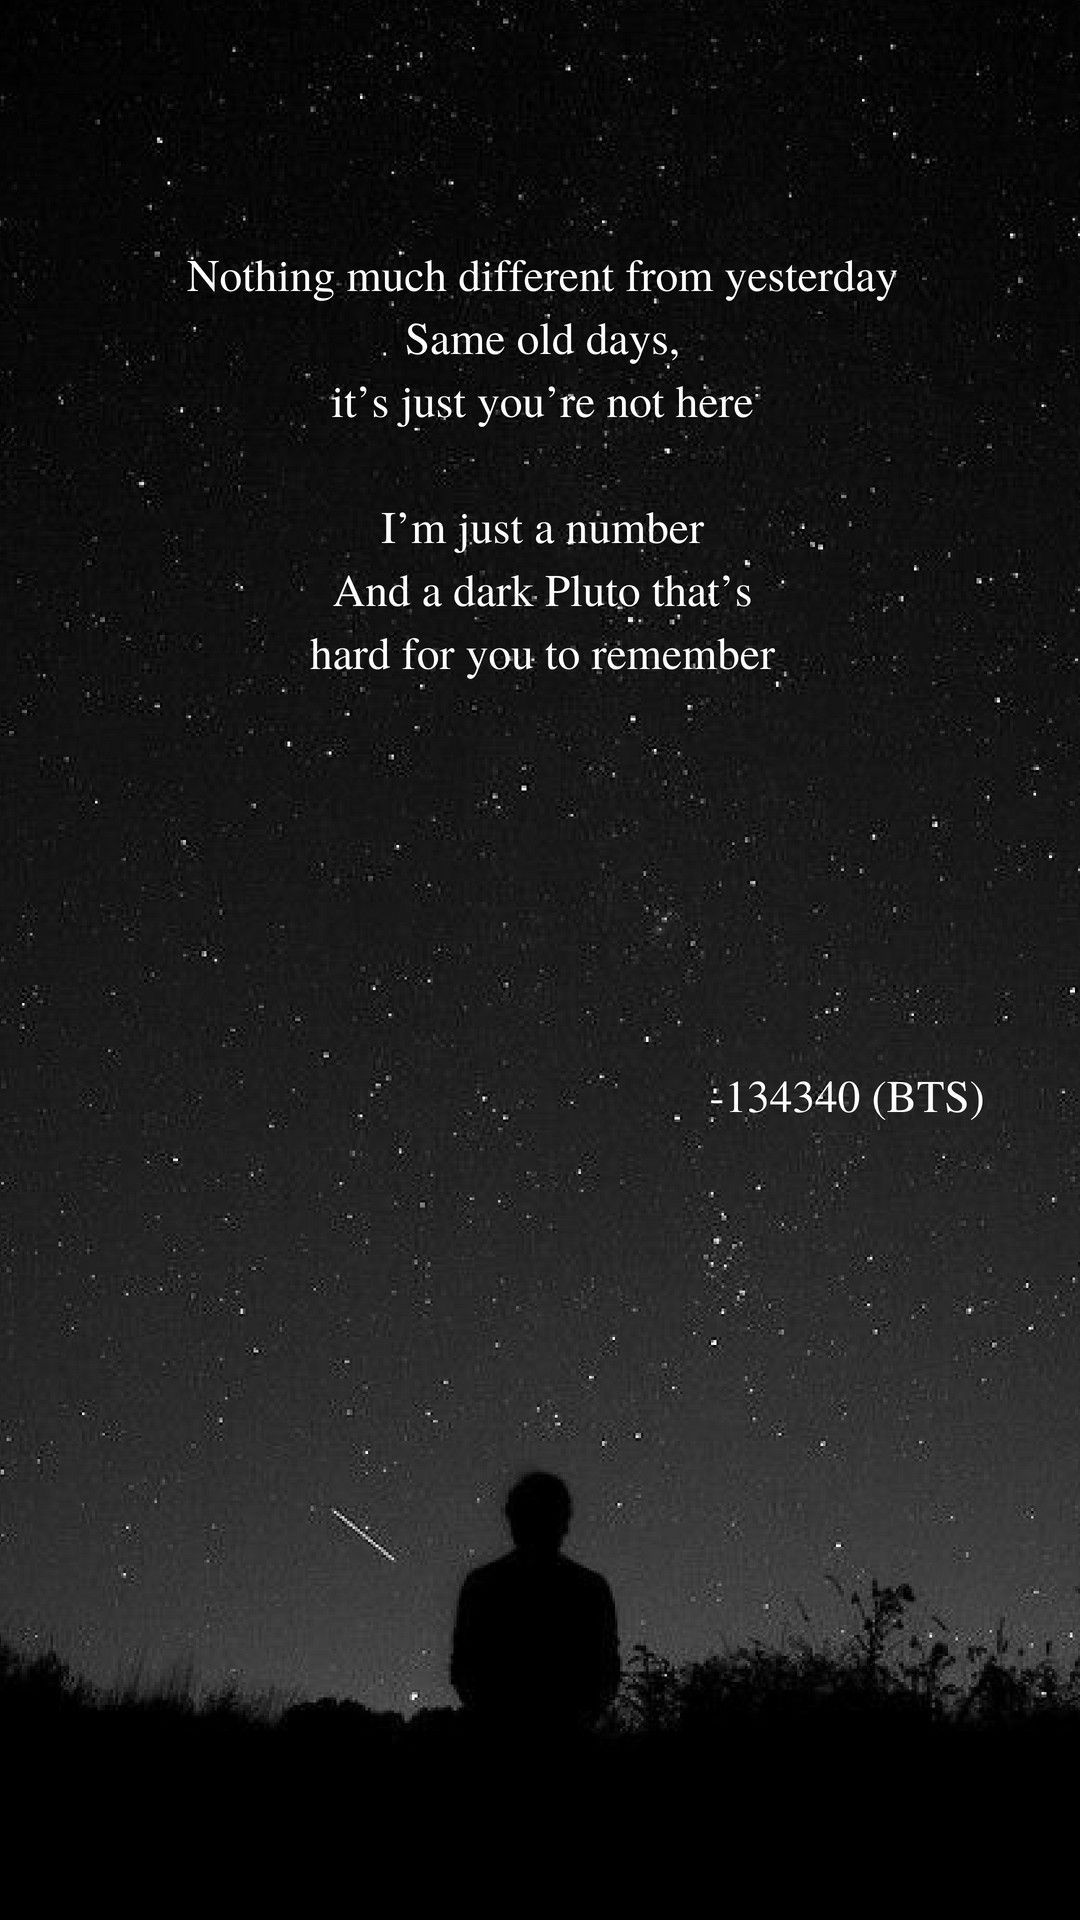 95 Bts Quotes Wallpaper Hd For Laptop For FREE - MyWeb